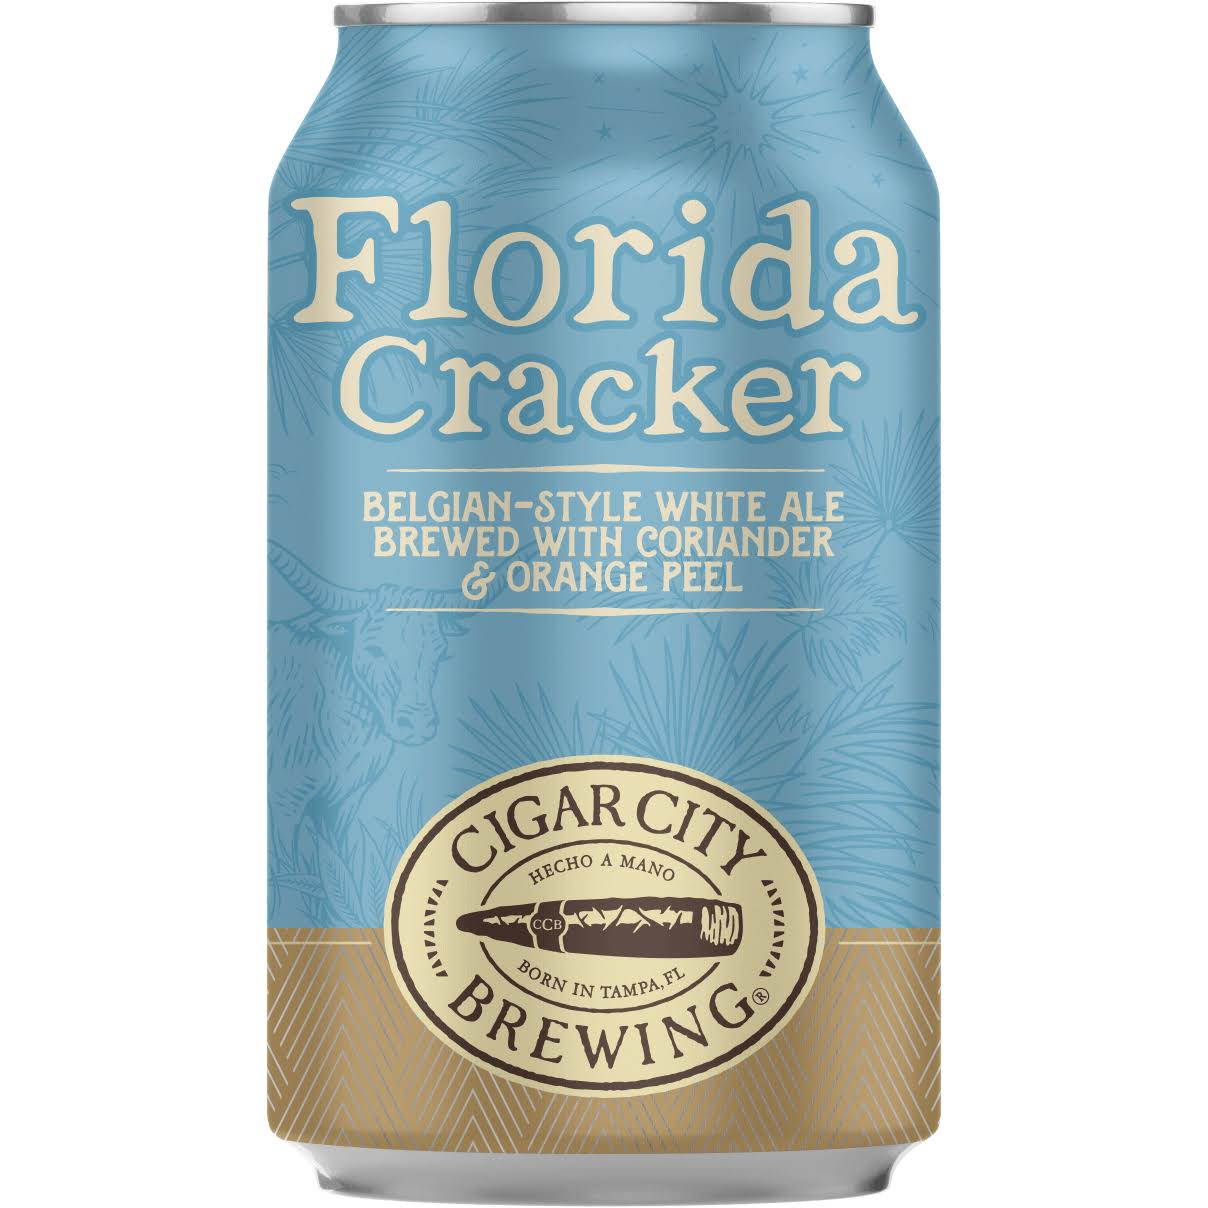 Cigar City Brewing Company Cracker Belgian-Style White Ale